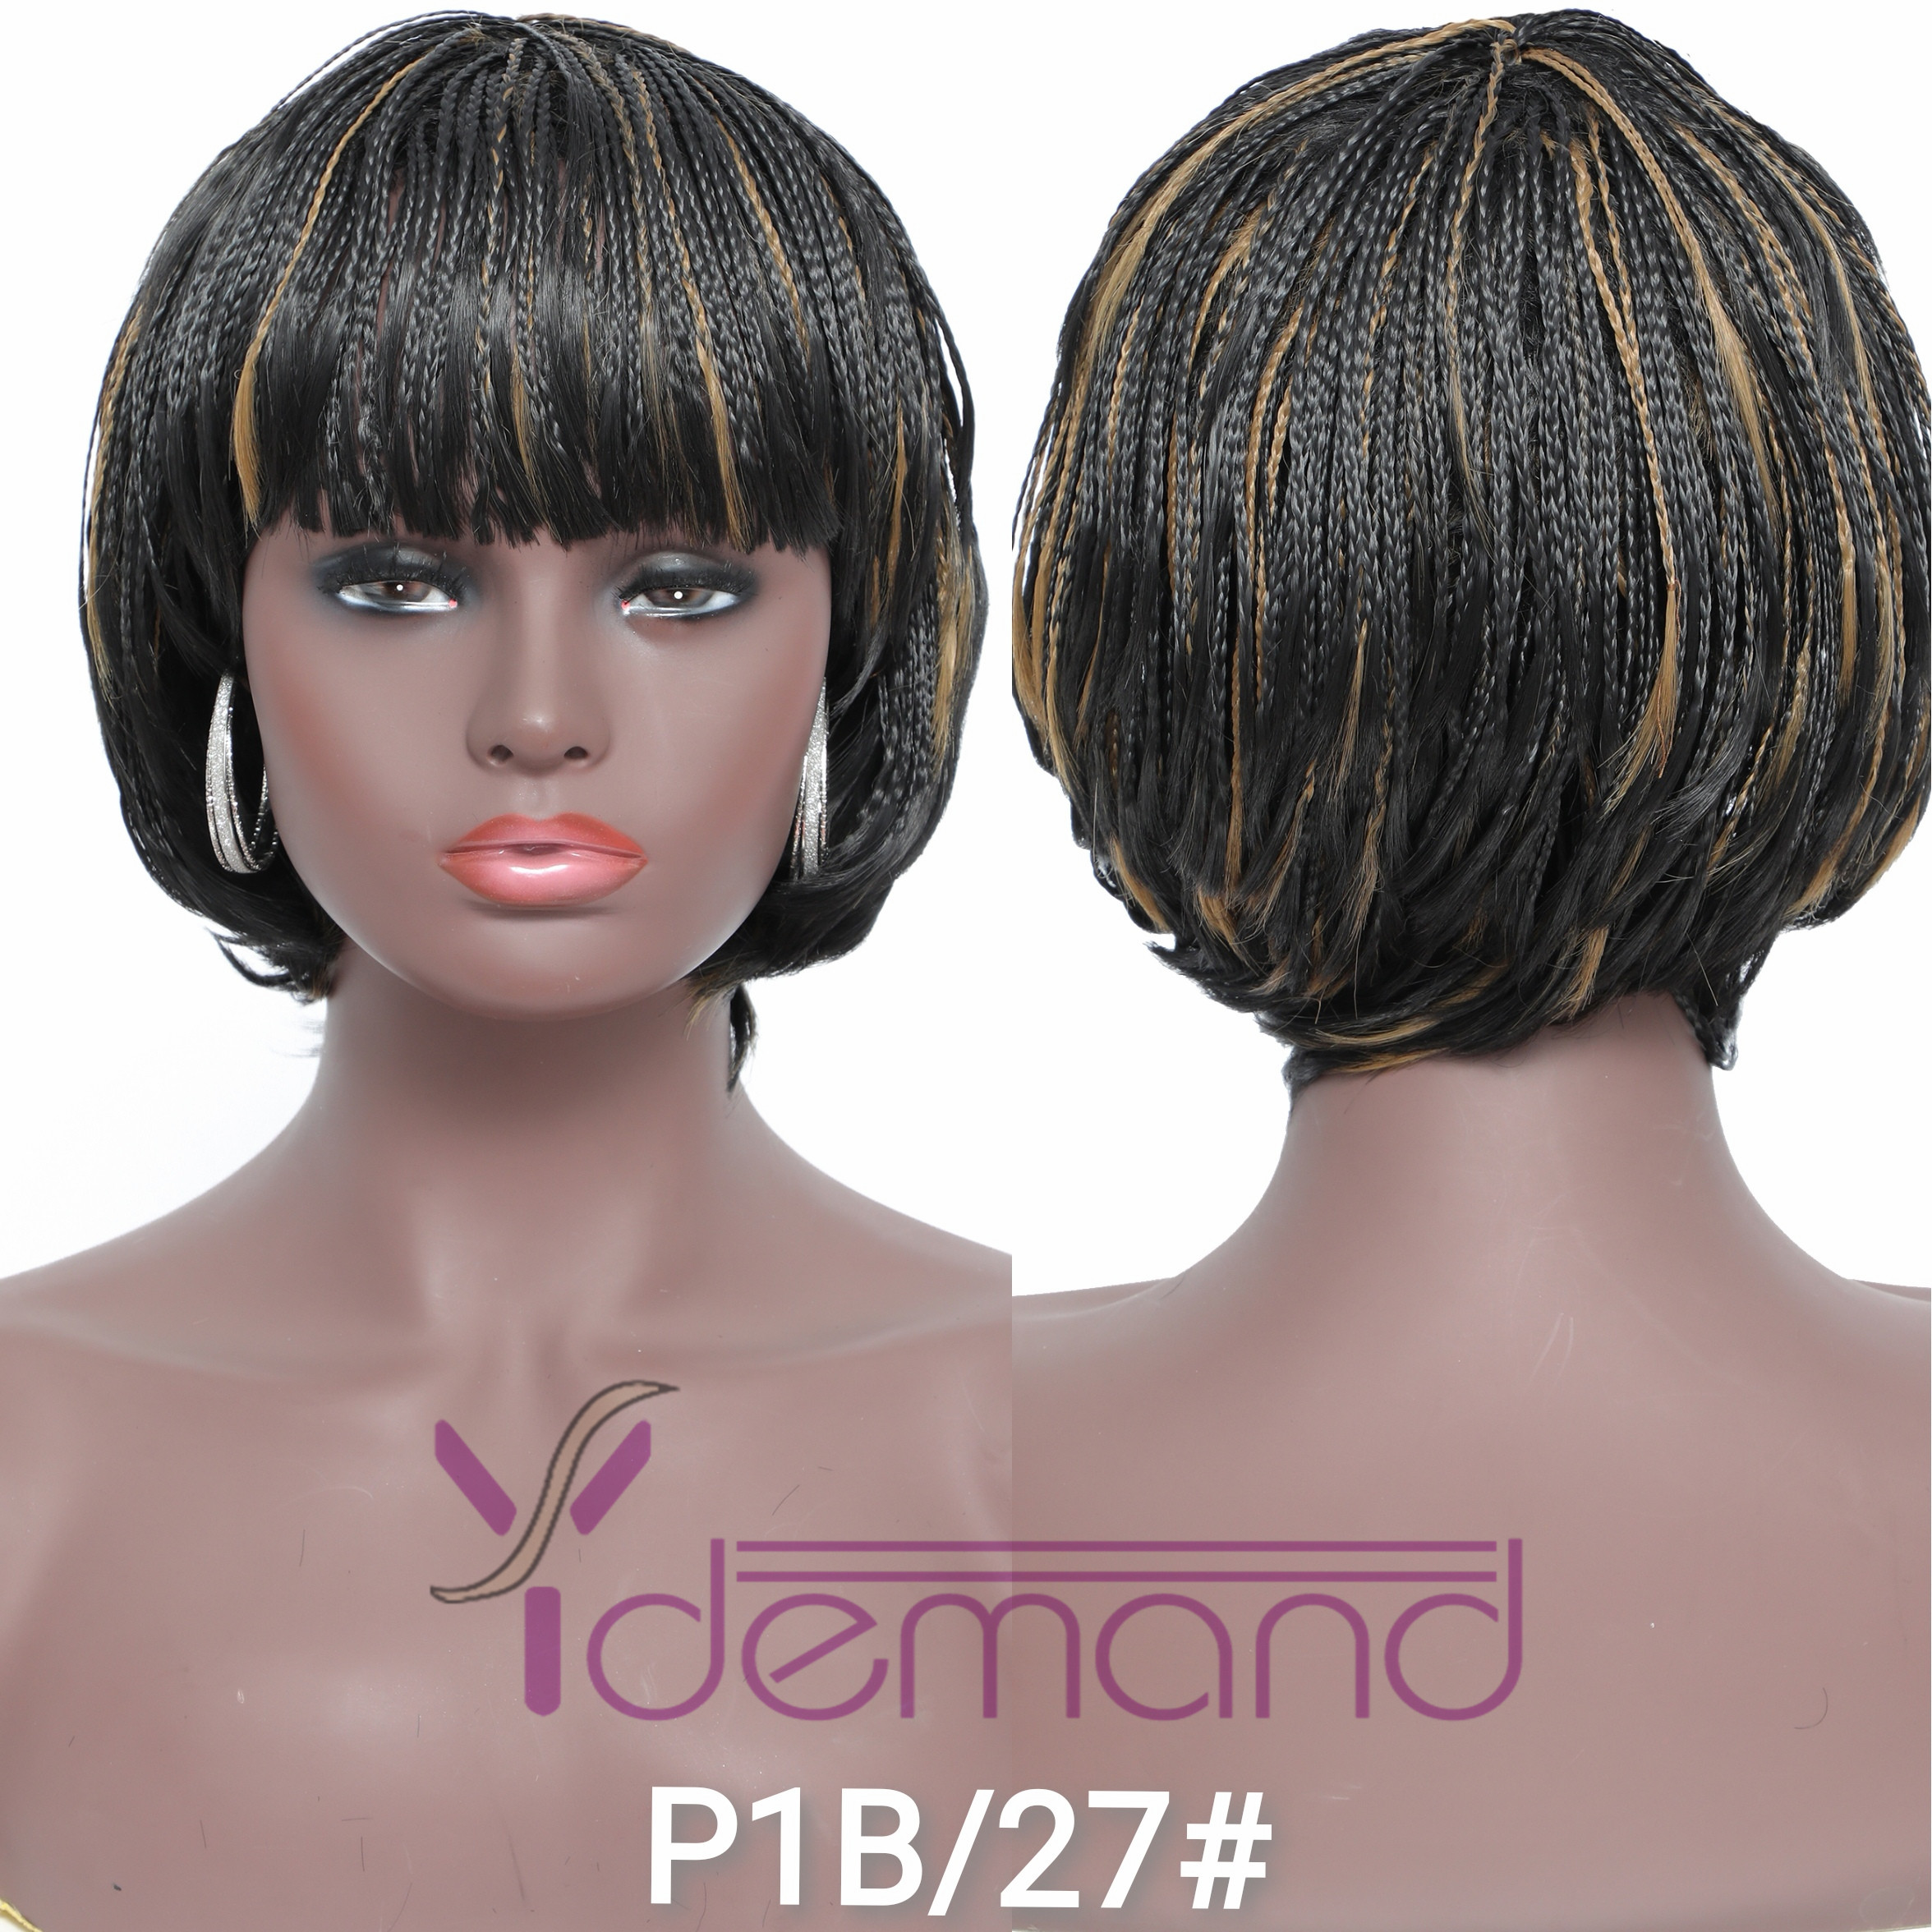 Y Demand Short Braided Wigs With Bangs For Women Braid African Wig Natural Black Cool Girl Natural Hair Synthetic Fiber